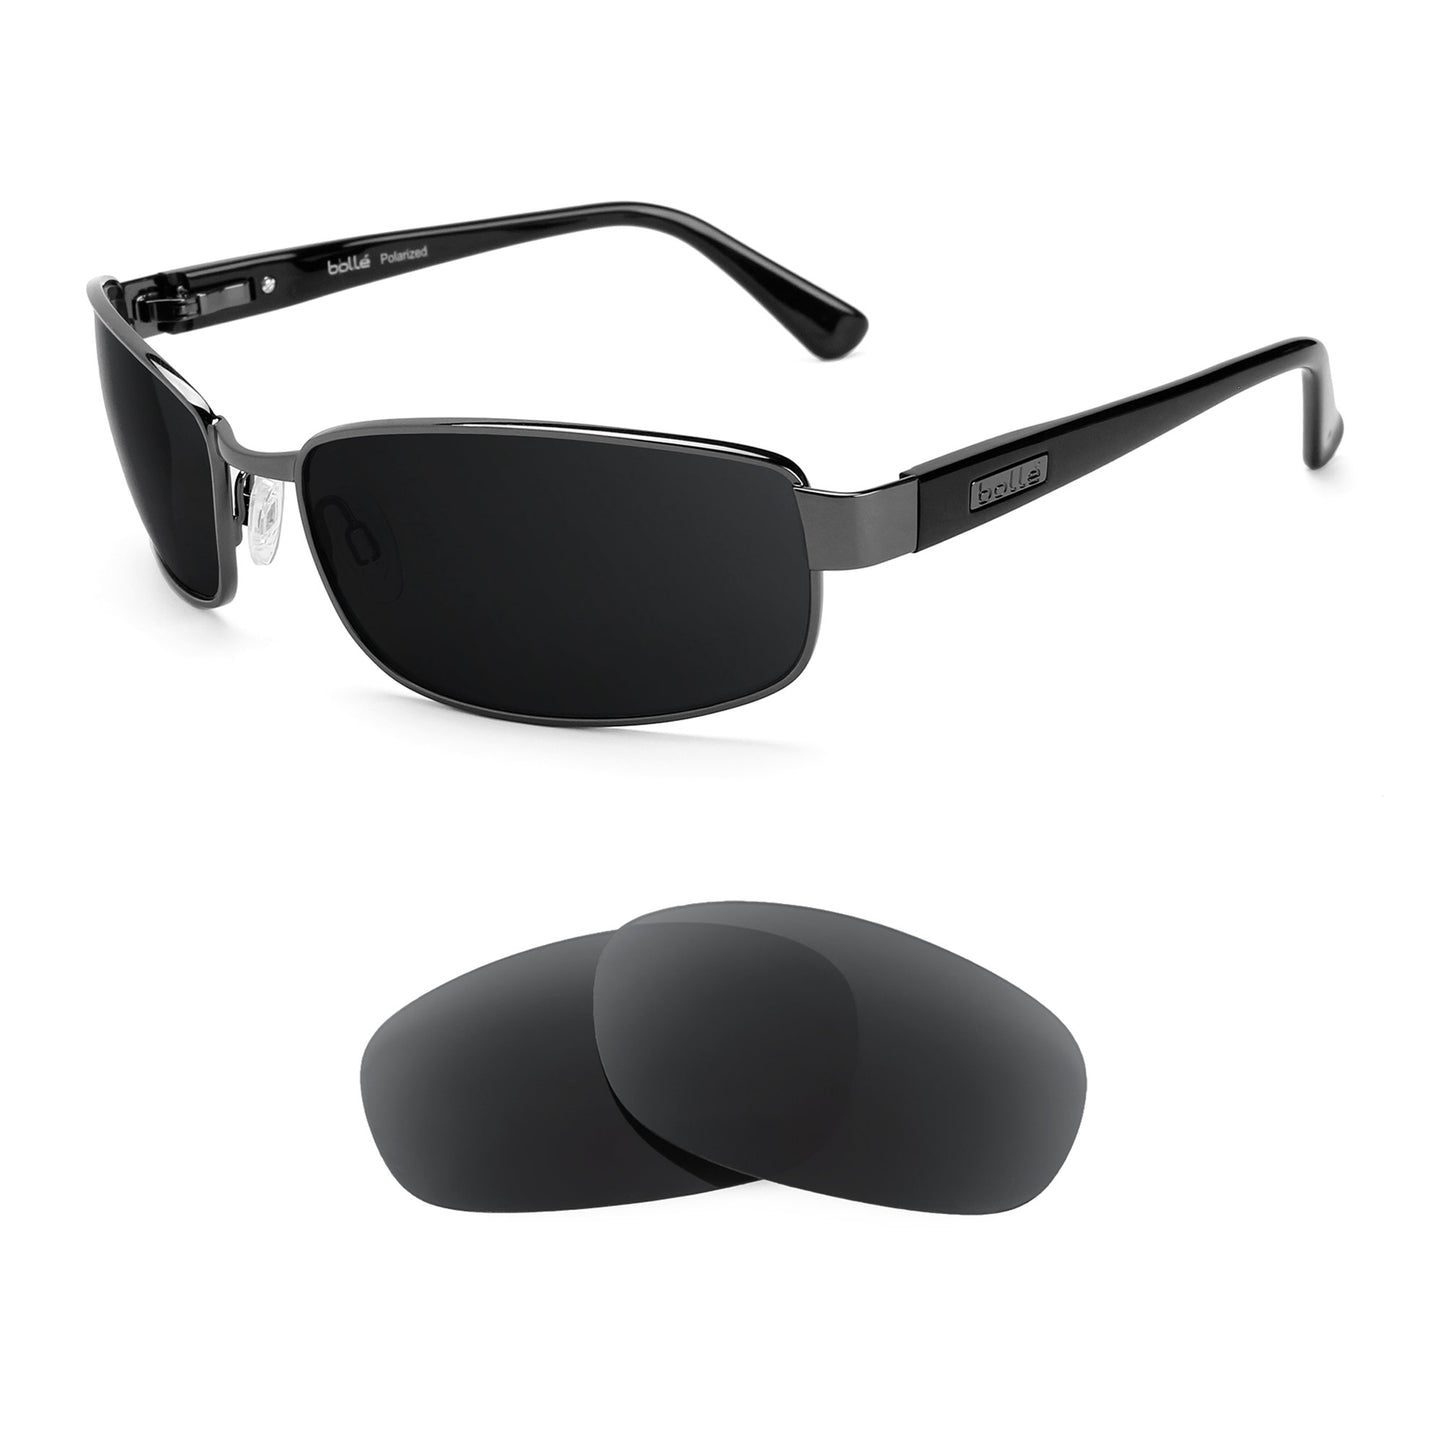 Bolle Delancey sunglasses with replacement lenses